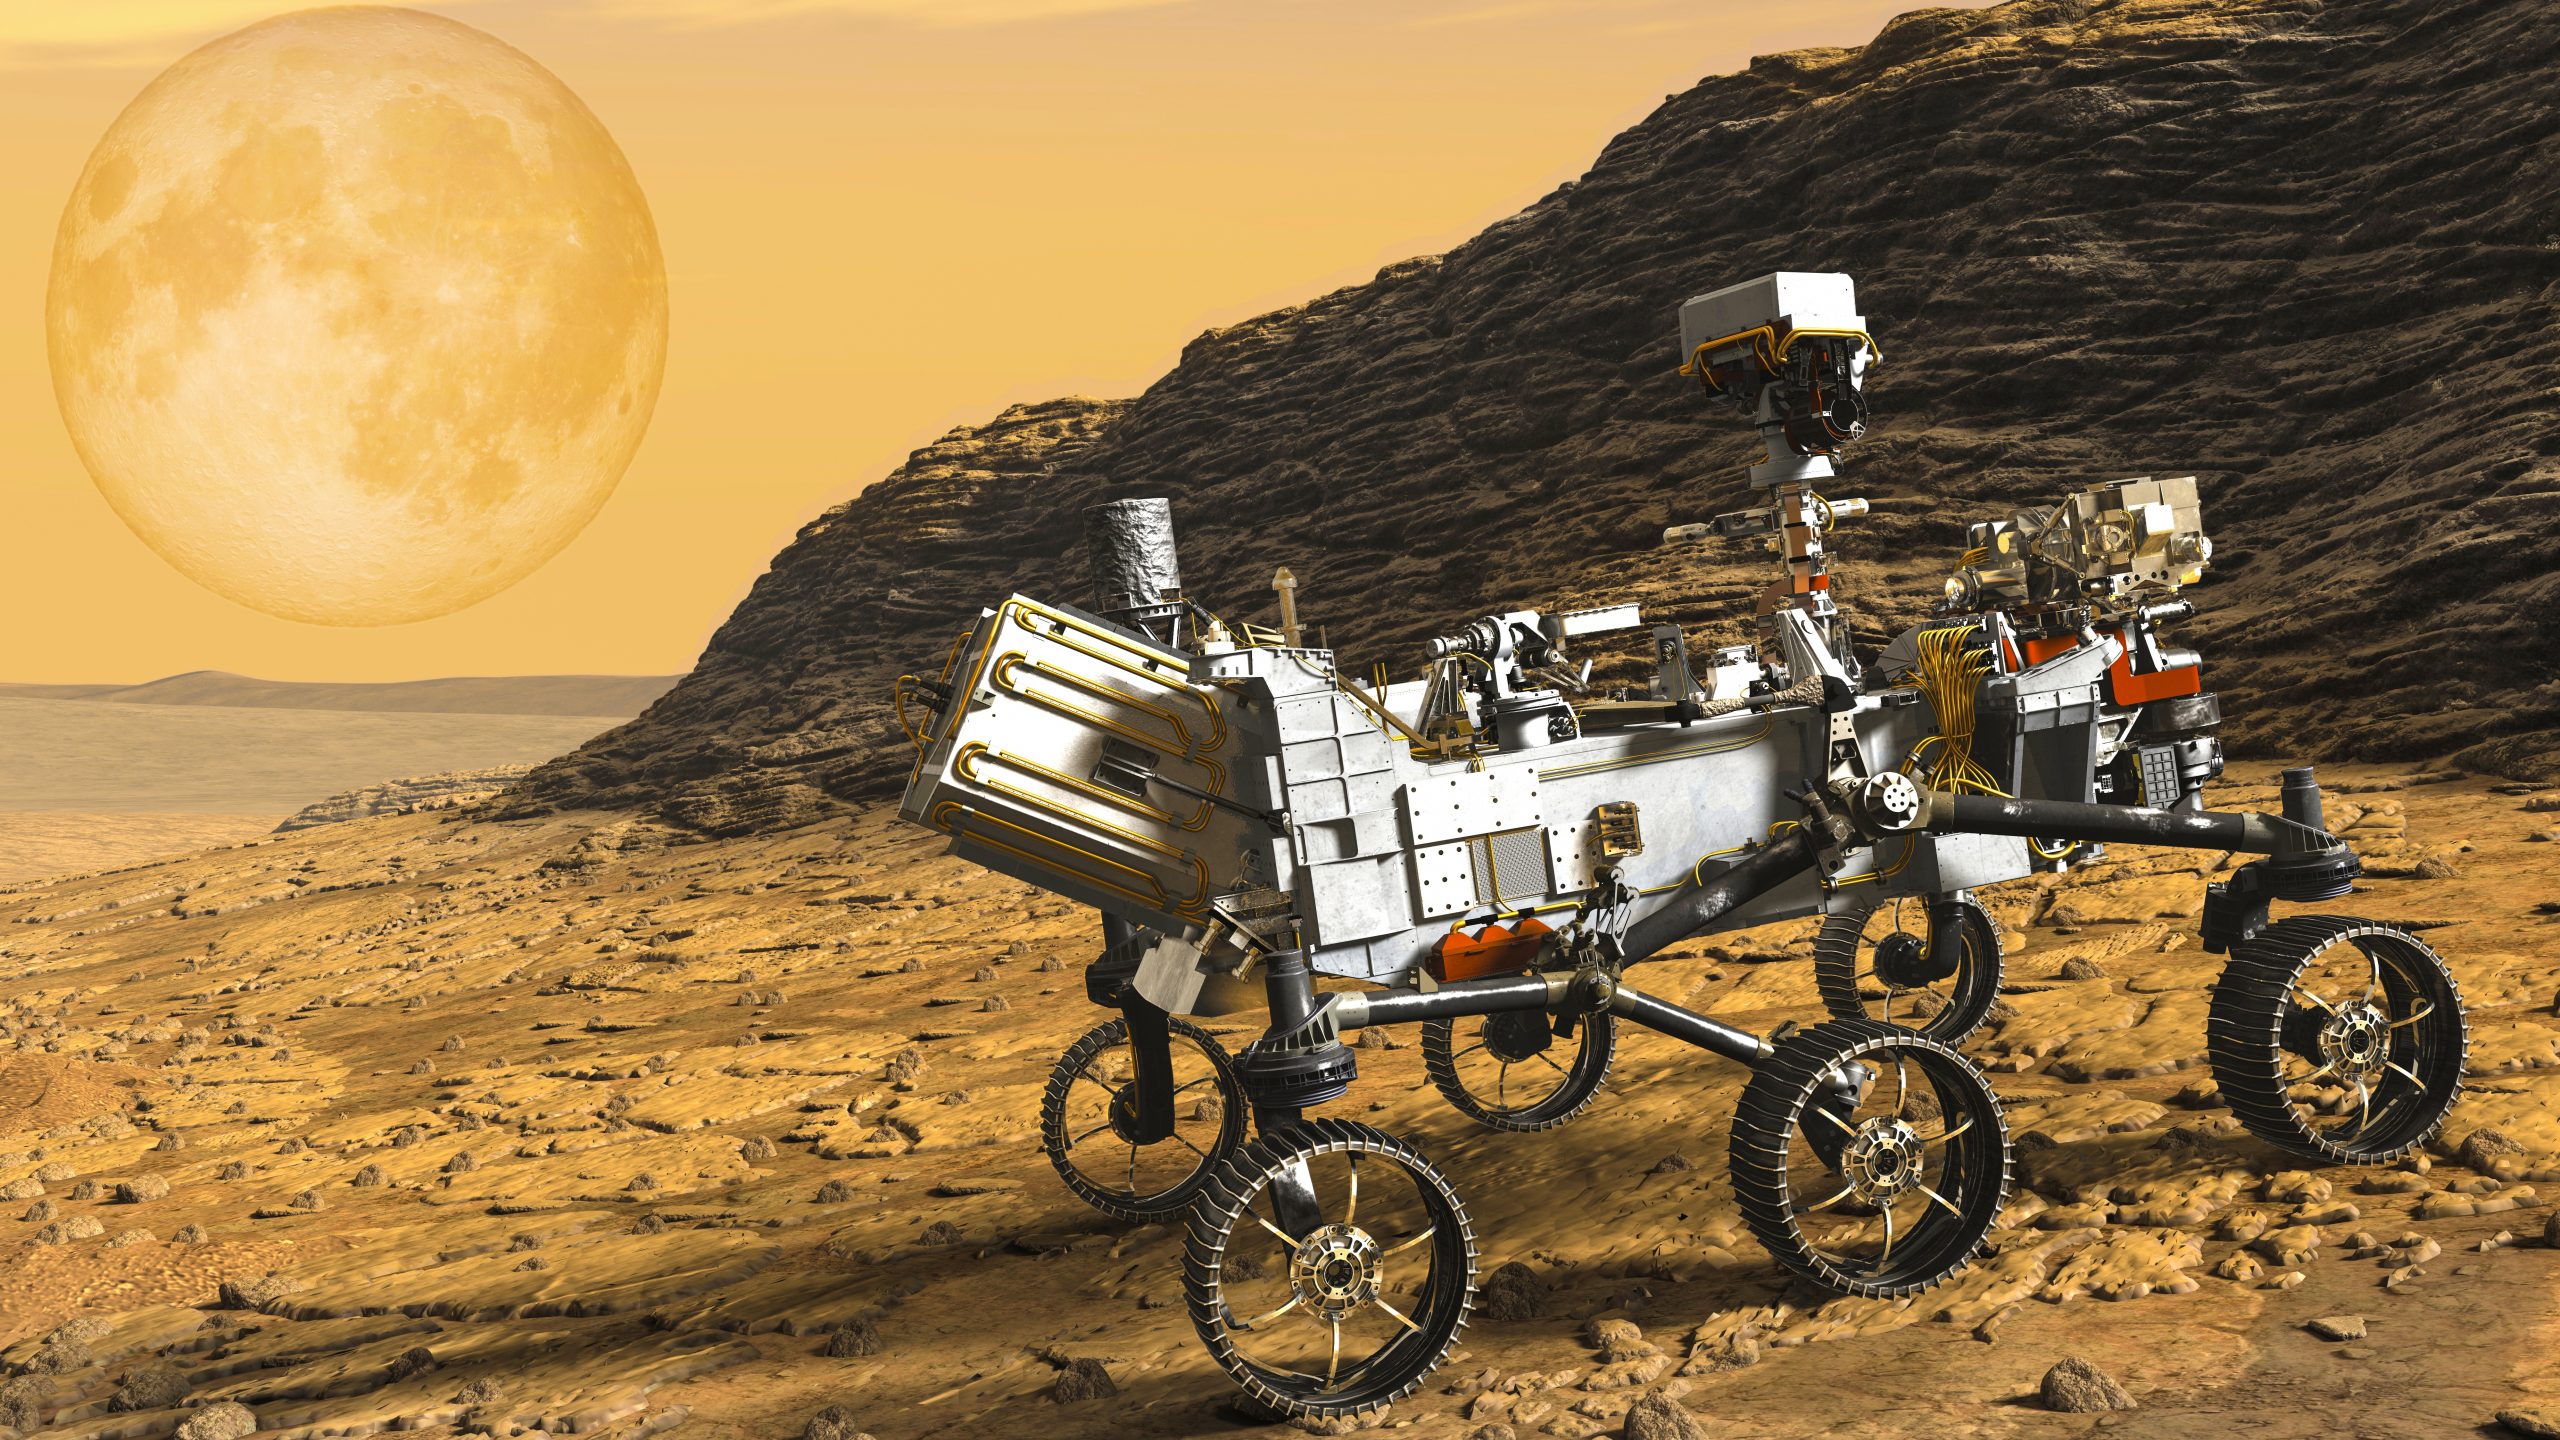 Mars,Rover,Perseverance,Explores.,3d,Illustration,Elements,Of,This,Image